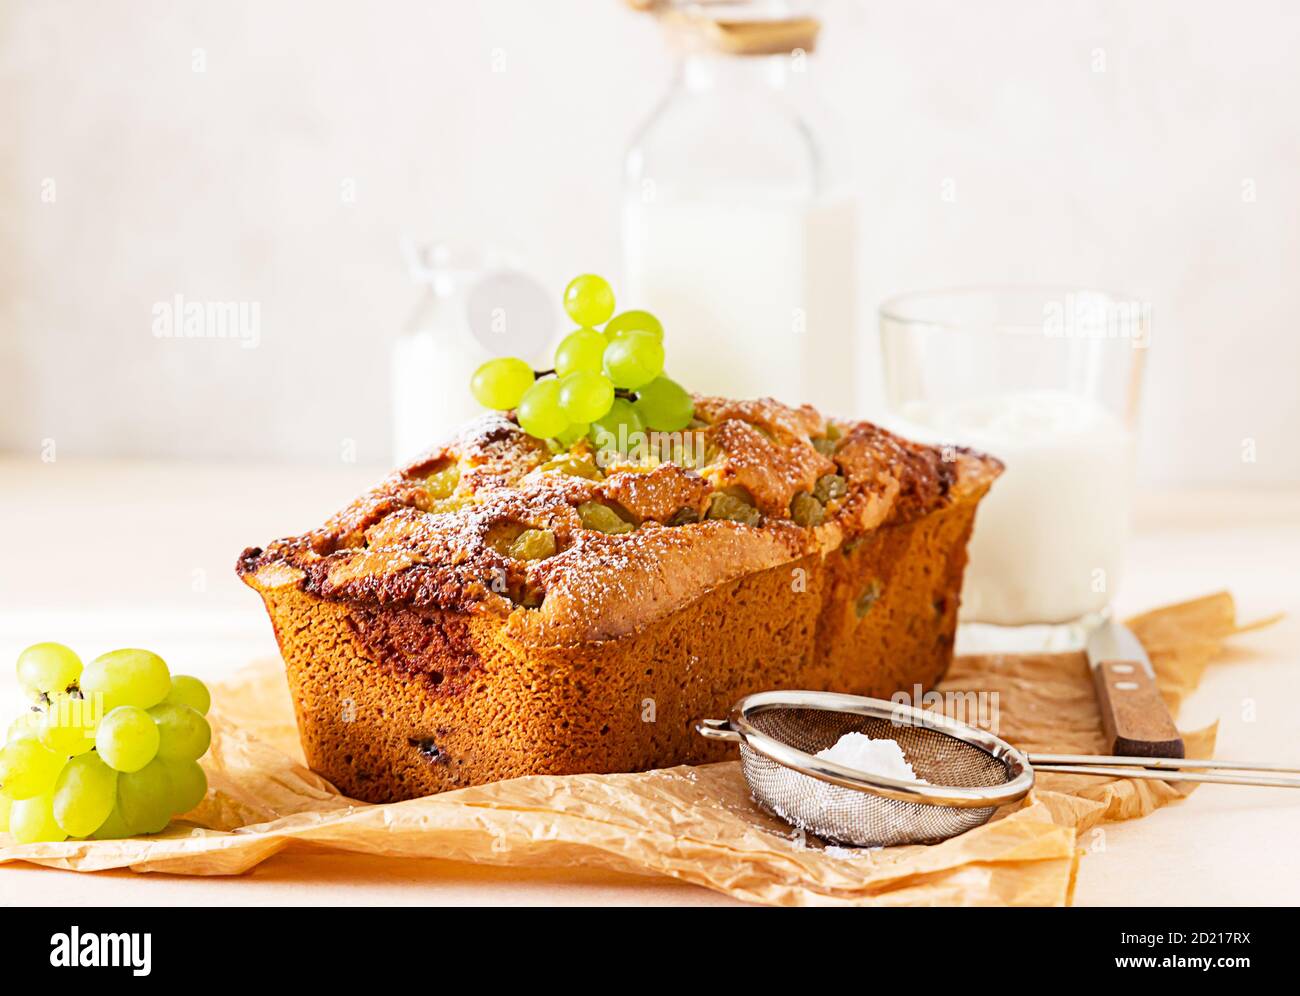 Delicious homemade grape loaf cake with thyme and sugar powder on parchment paper. Light stone background. Stock Photo